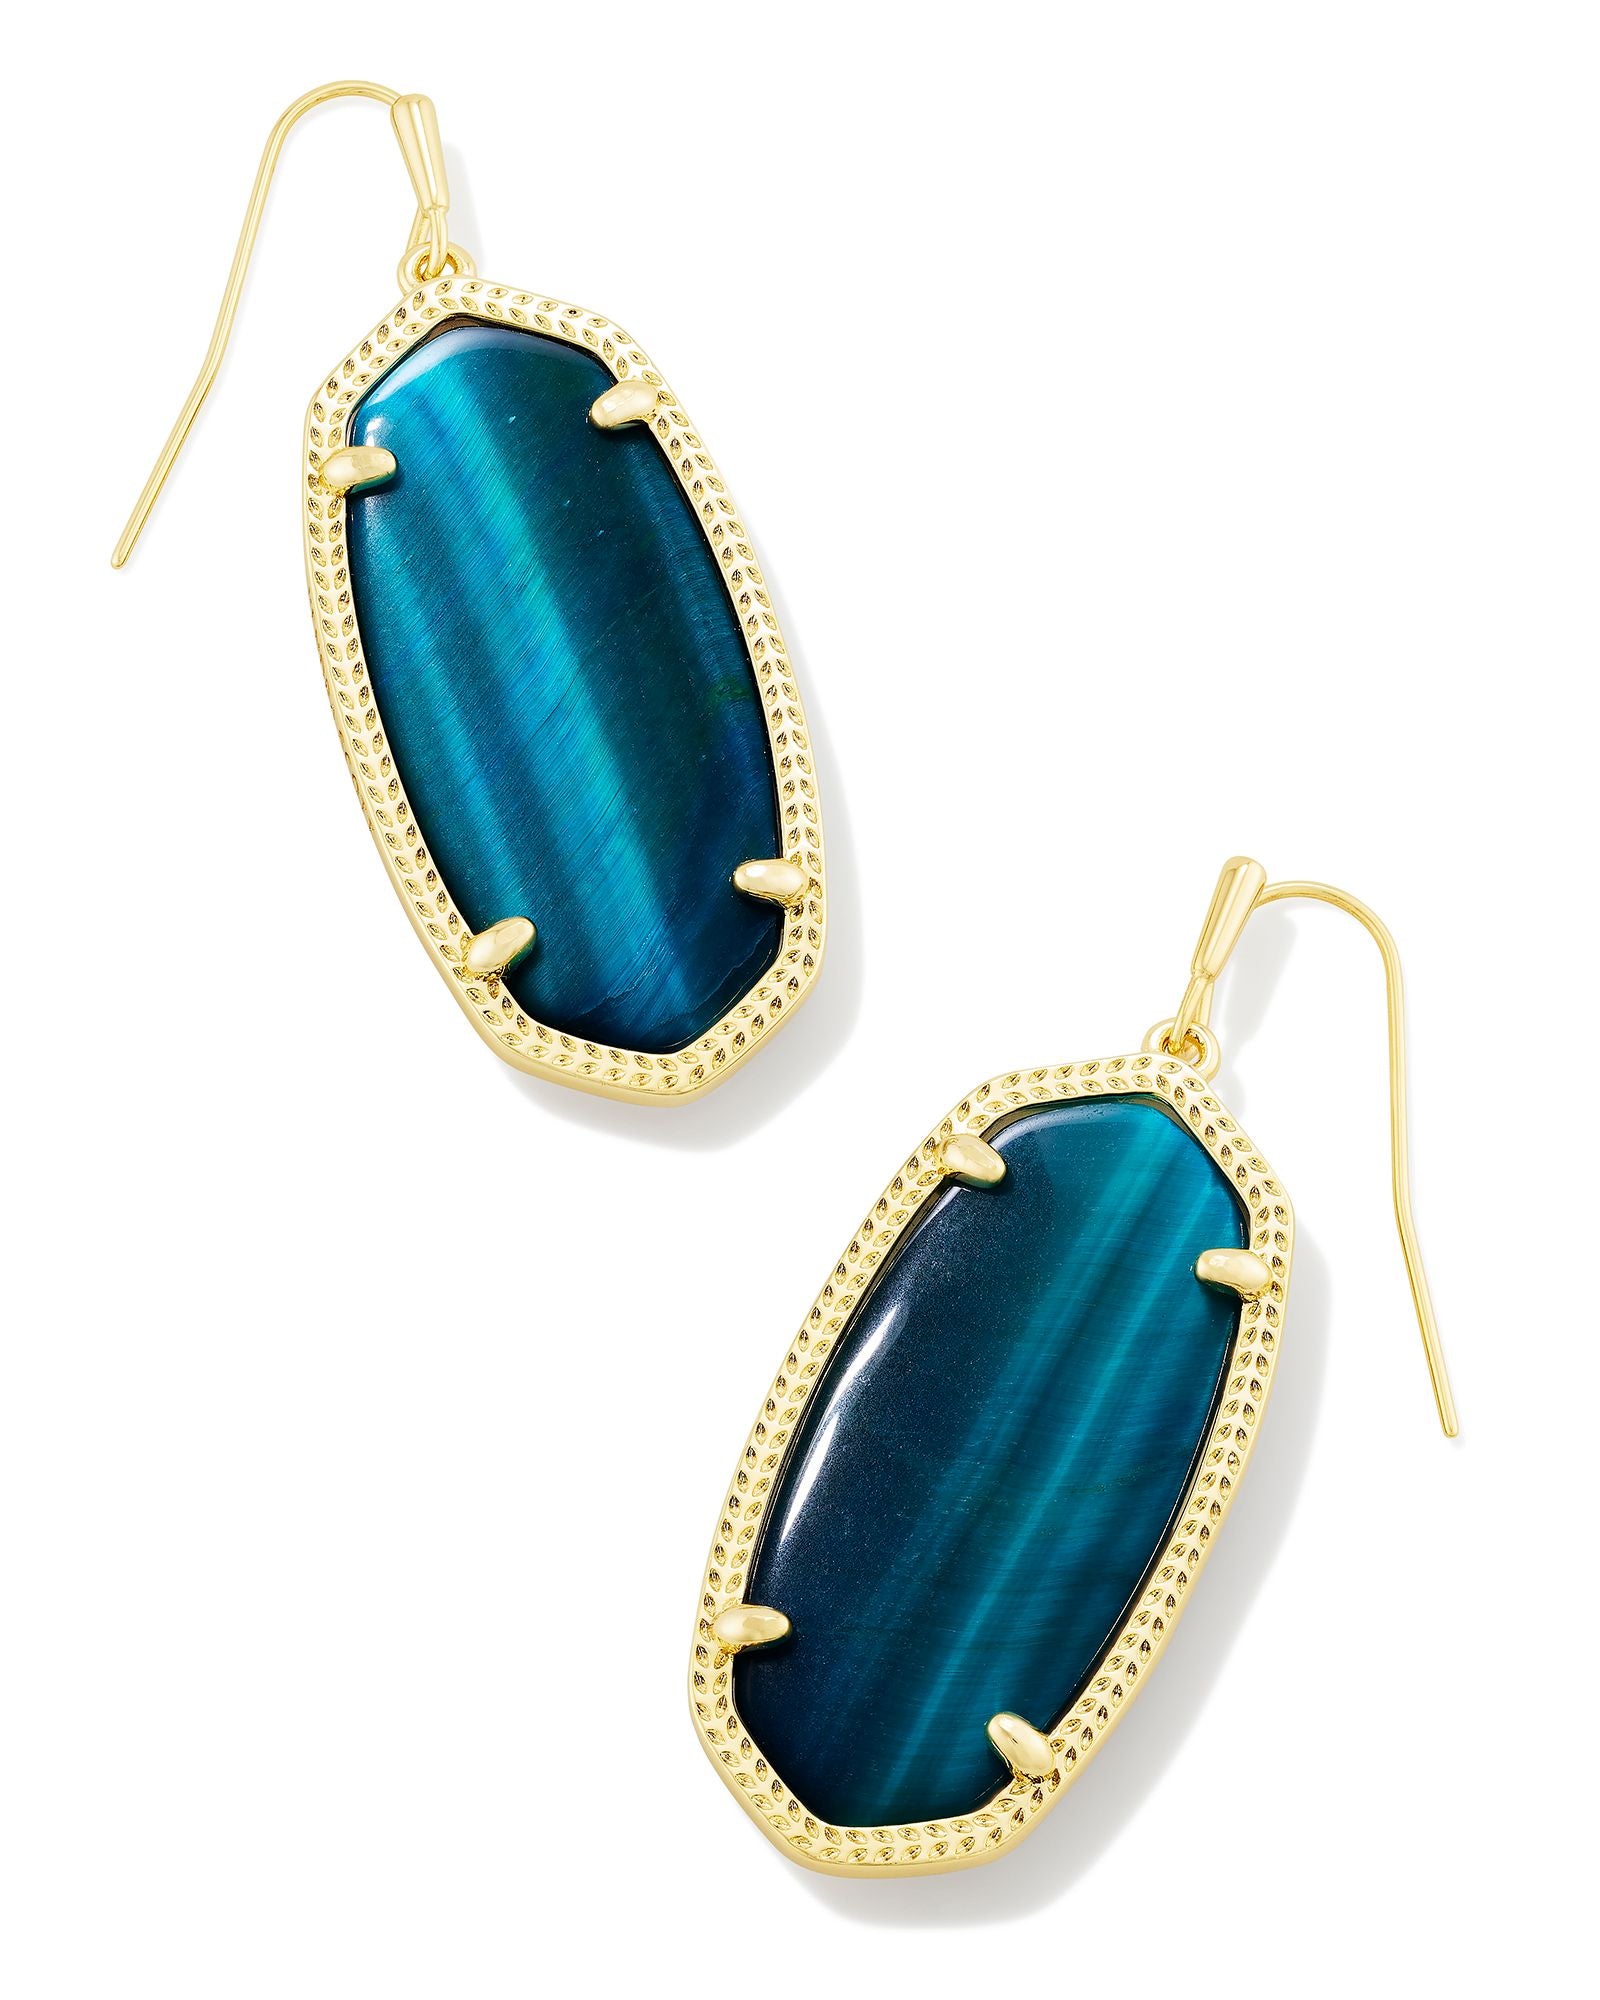 Kendra Scott Elle Oval Dangle Earrings in Teal Tigers Eye and Gold Plated